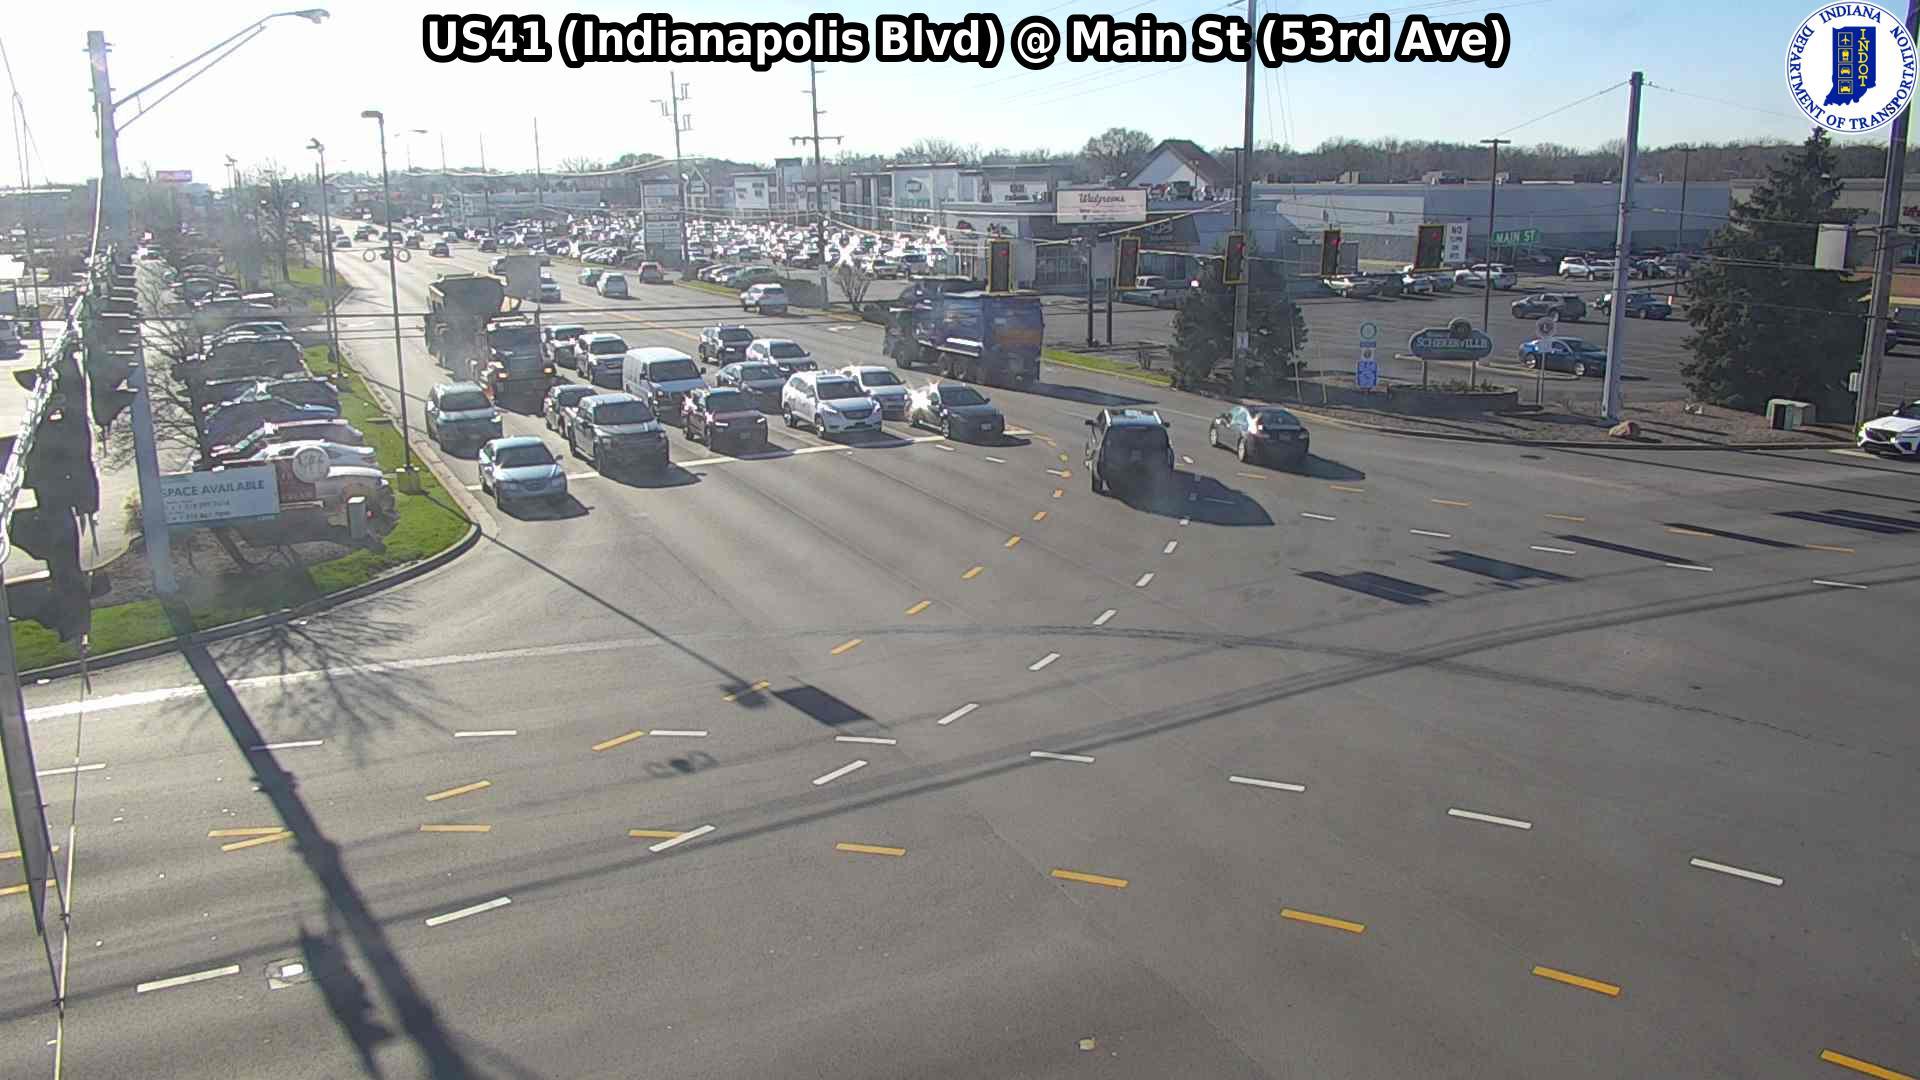 Traffic Cam Schererville: SIGNAL: US41 (Indianapolis Blvd) @ Main St (53rd Ave Player